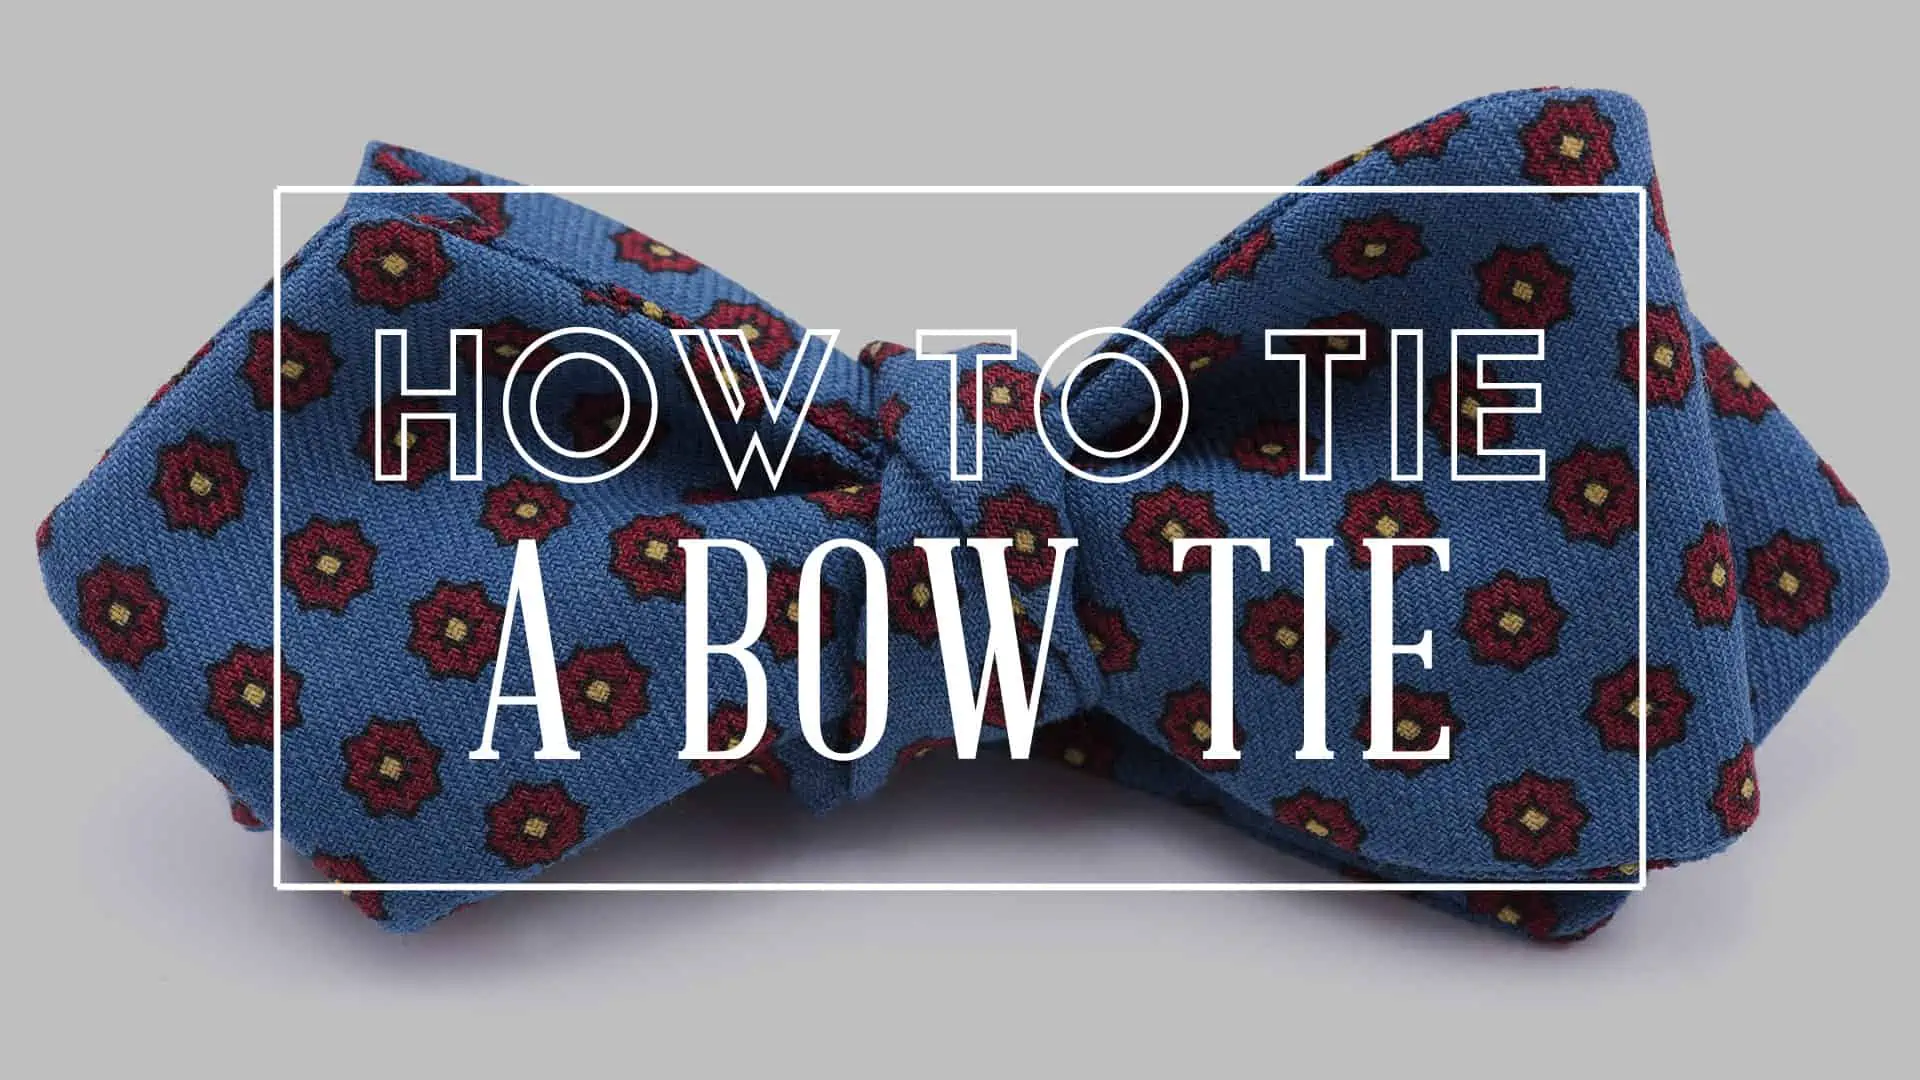 How To Tie a Bow Tie The Easy Way